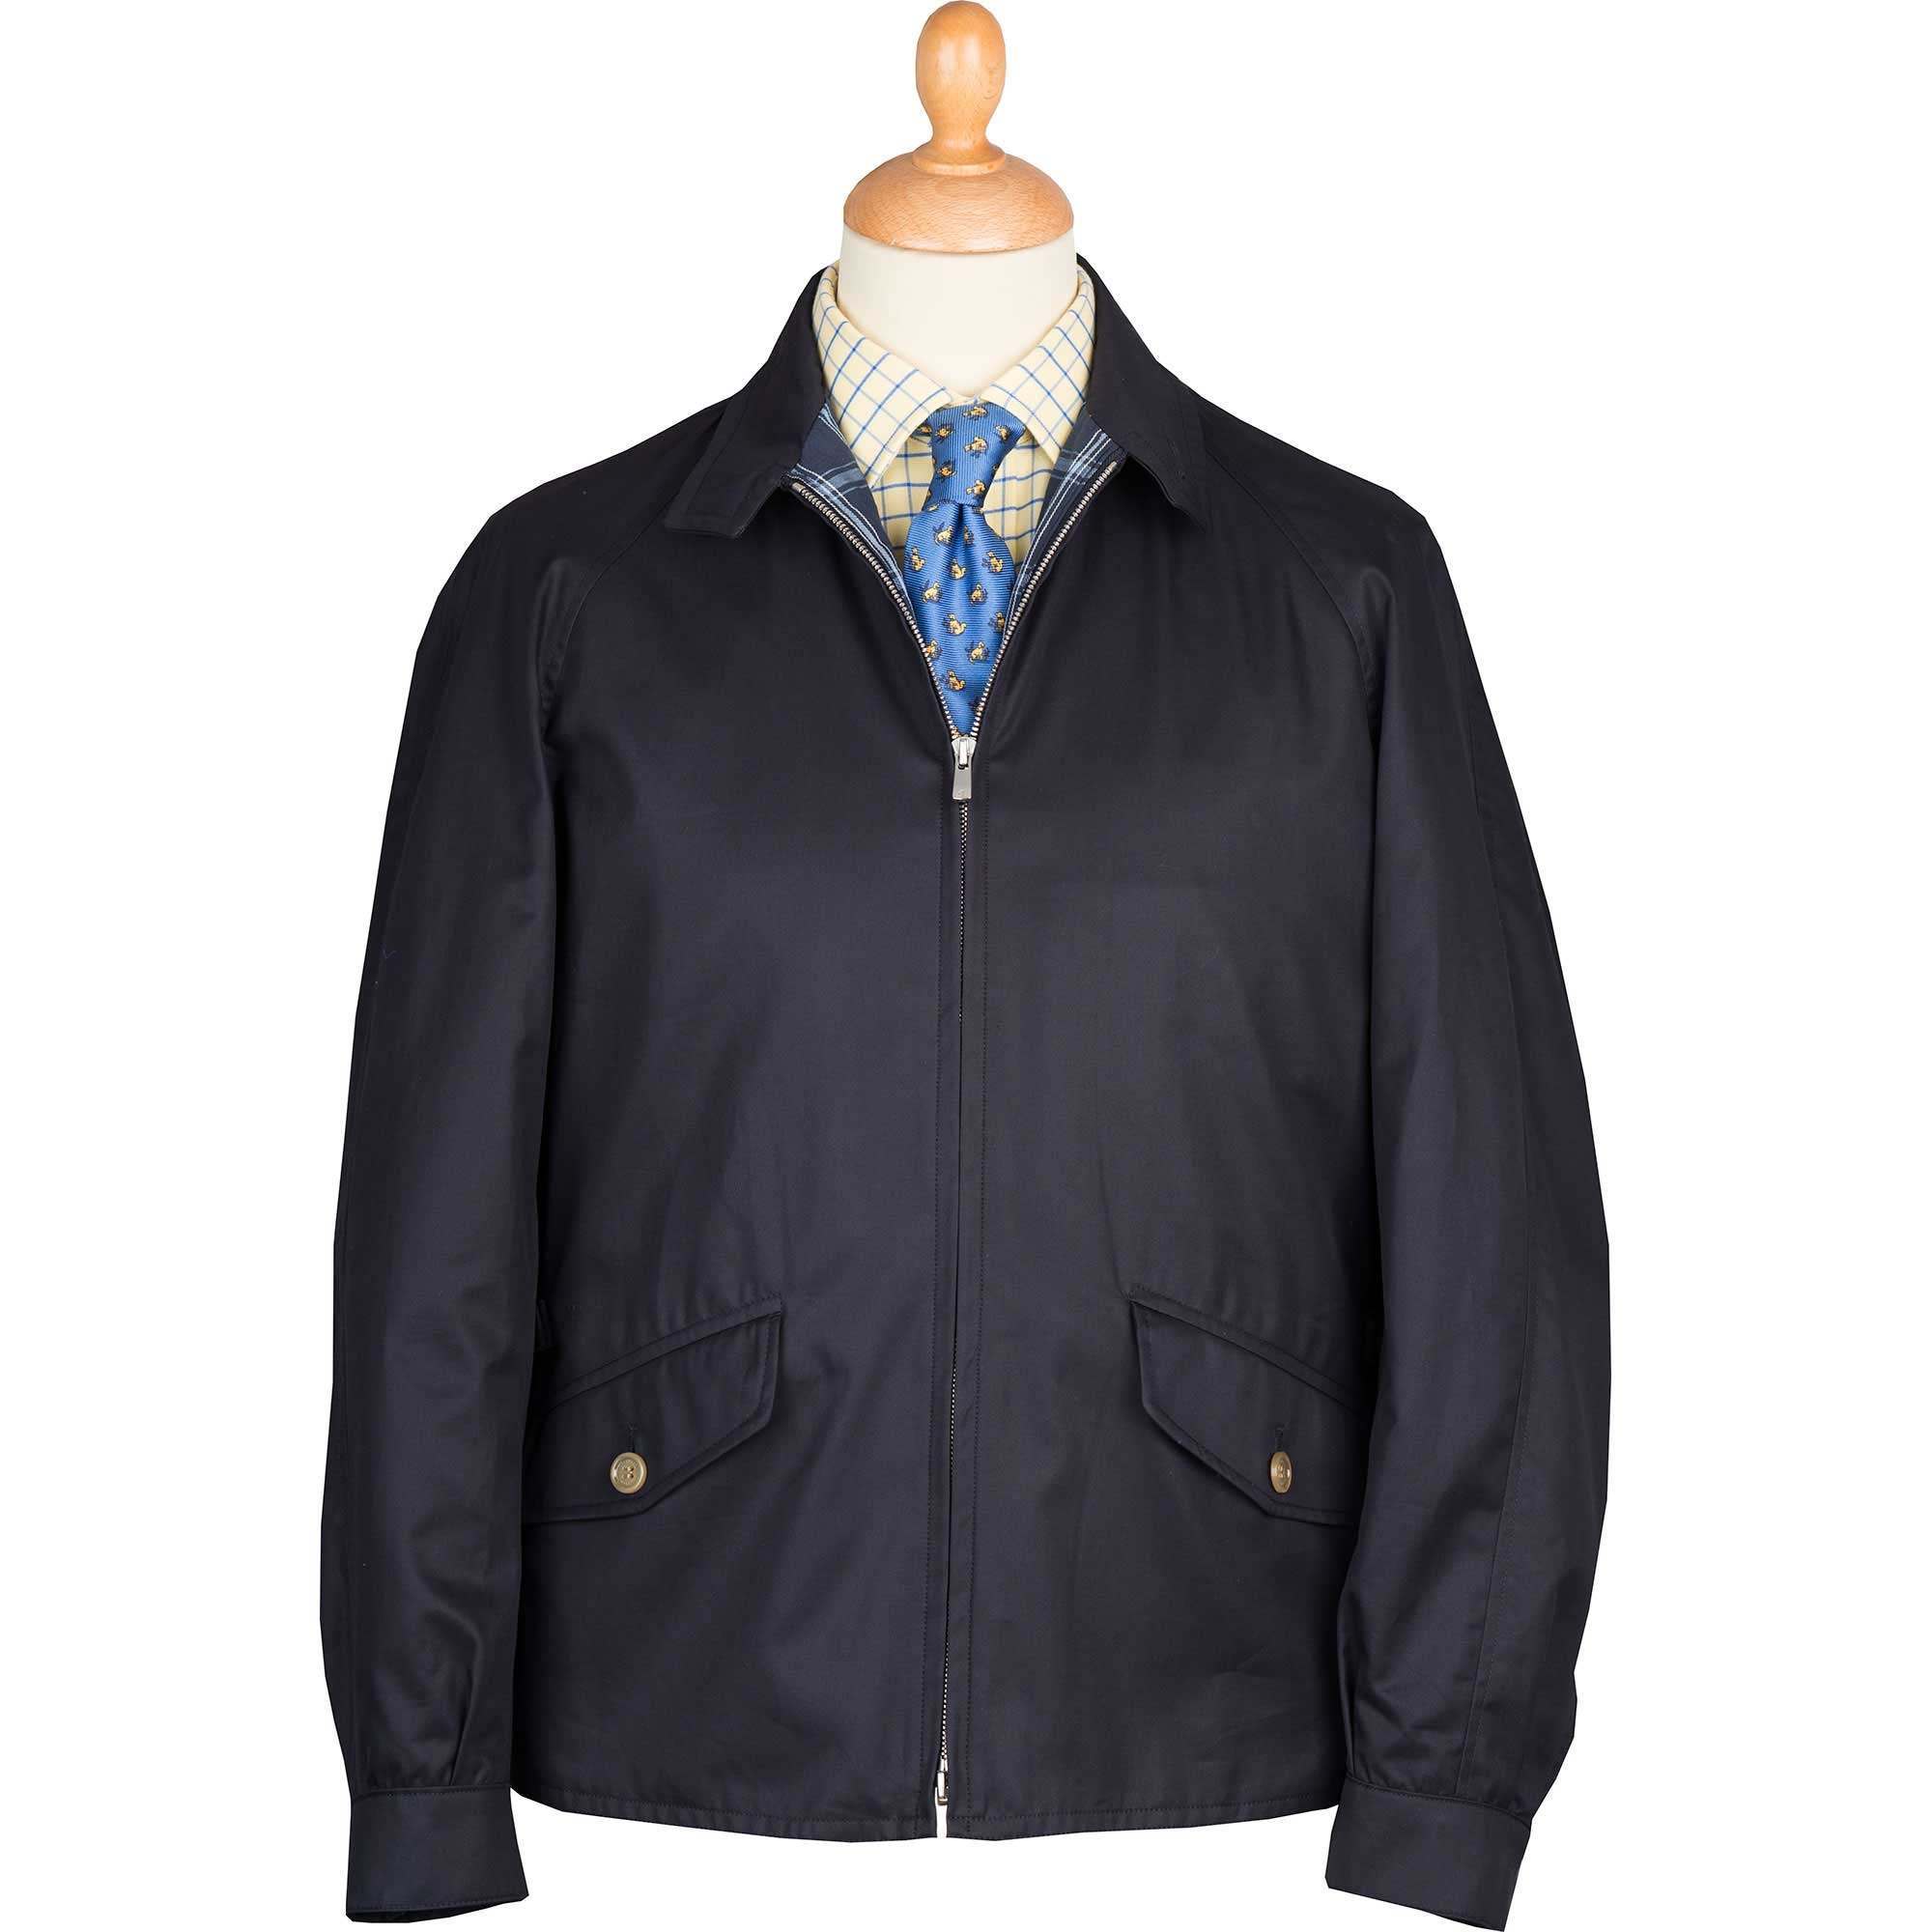 Grenfell Shooting Jacket | Men's Country Clothing | Cordings US